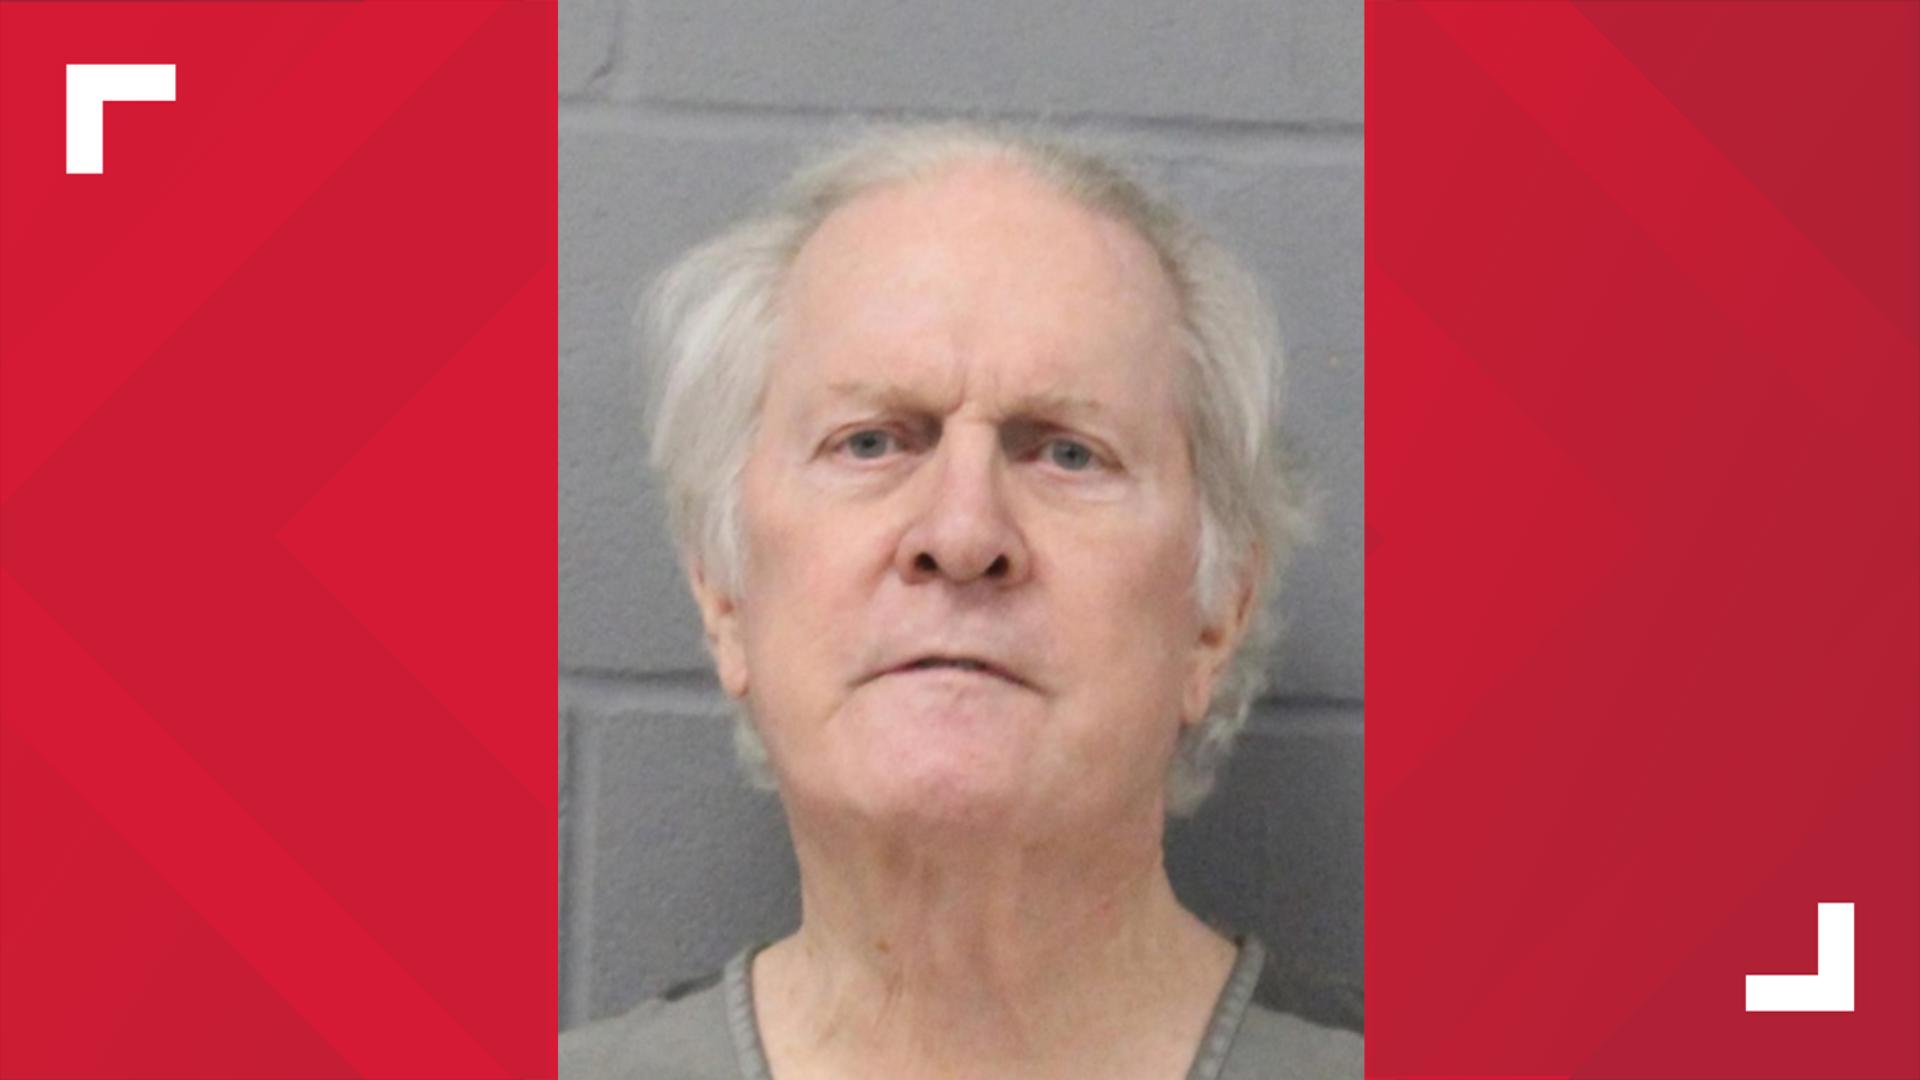 A 75-year-old Austin businessman is facing new arson charges in connection with multiple fires set across the city between December and March.